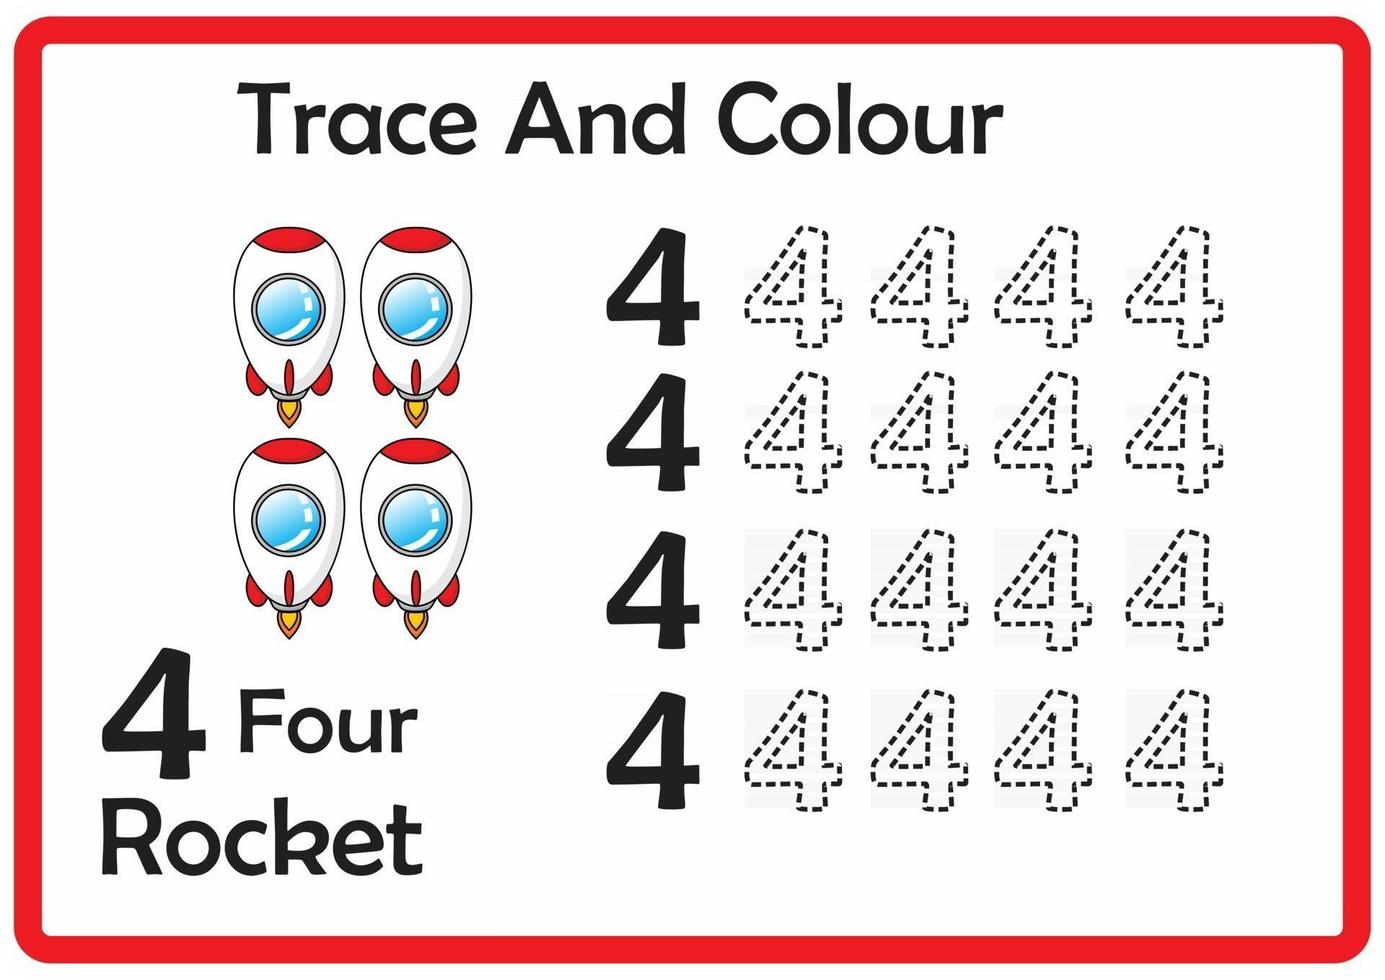 trace and colour rocket number 4 vector